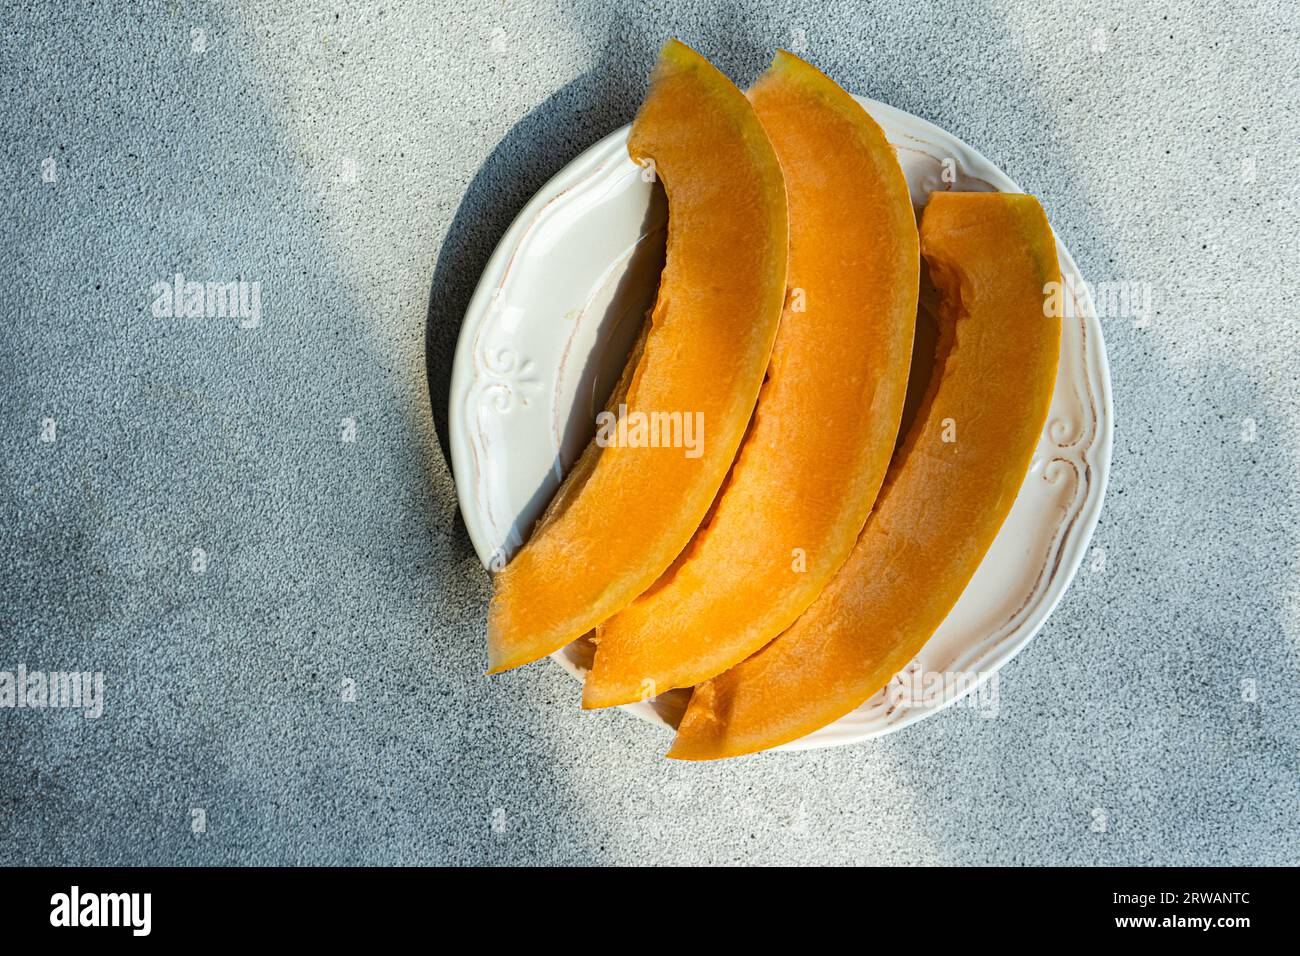 Tasty yellow organic melon slices on the plate Stock Photo